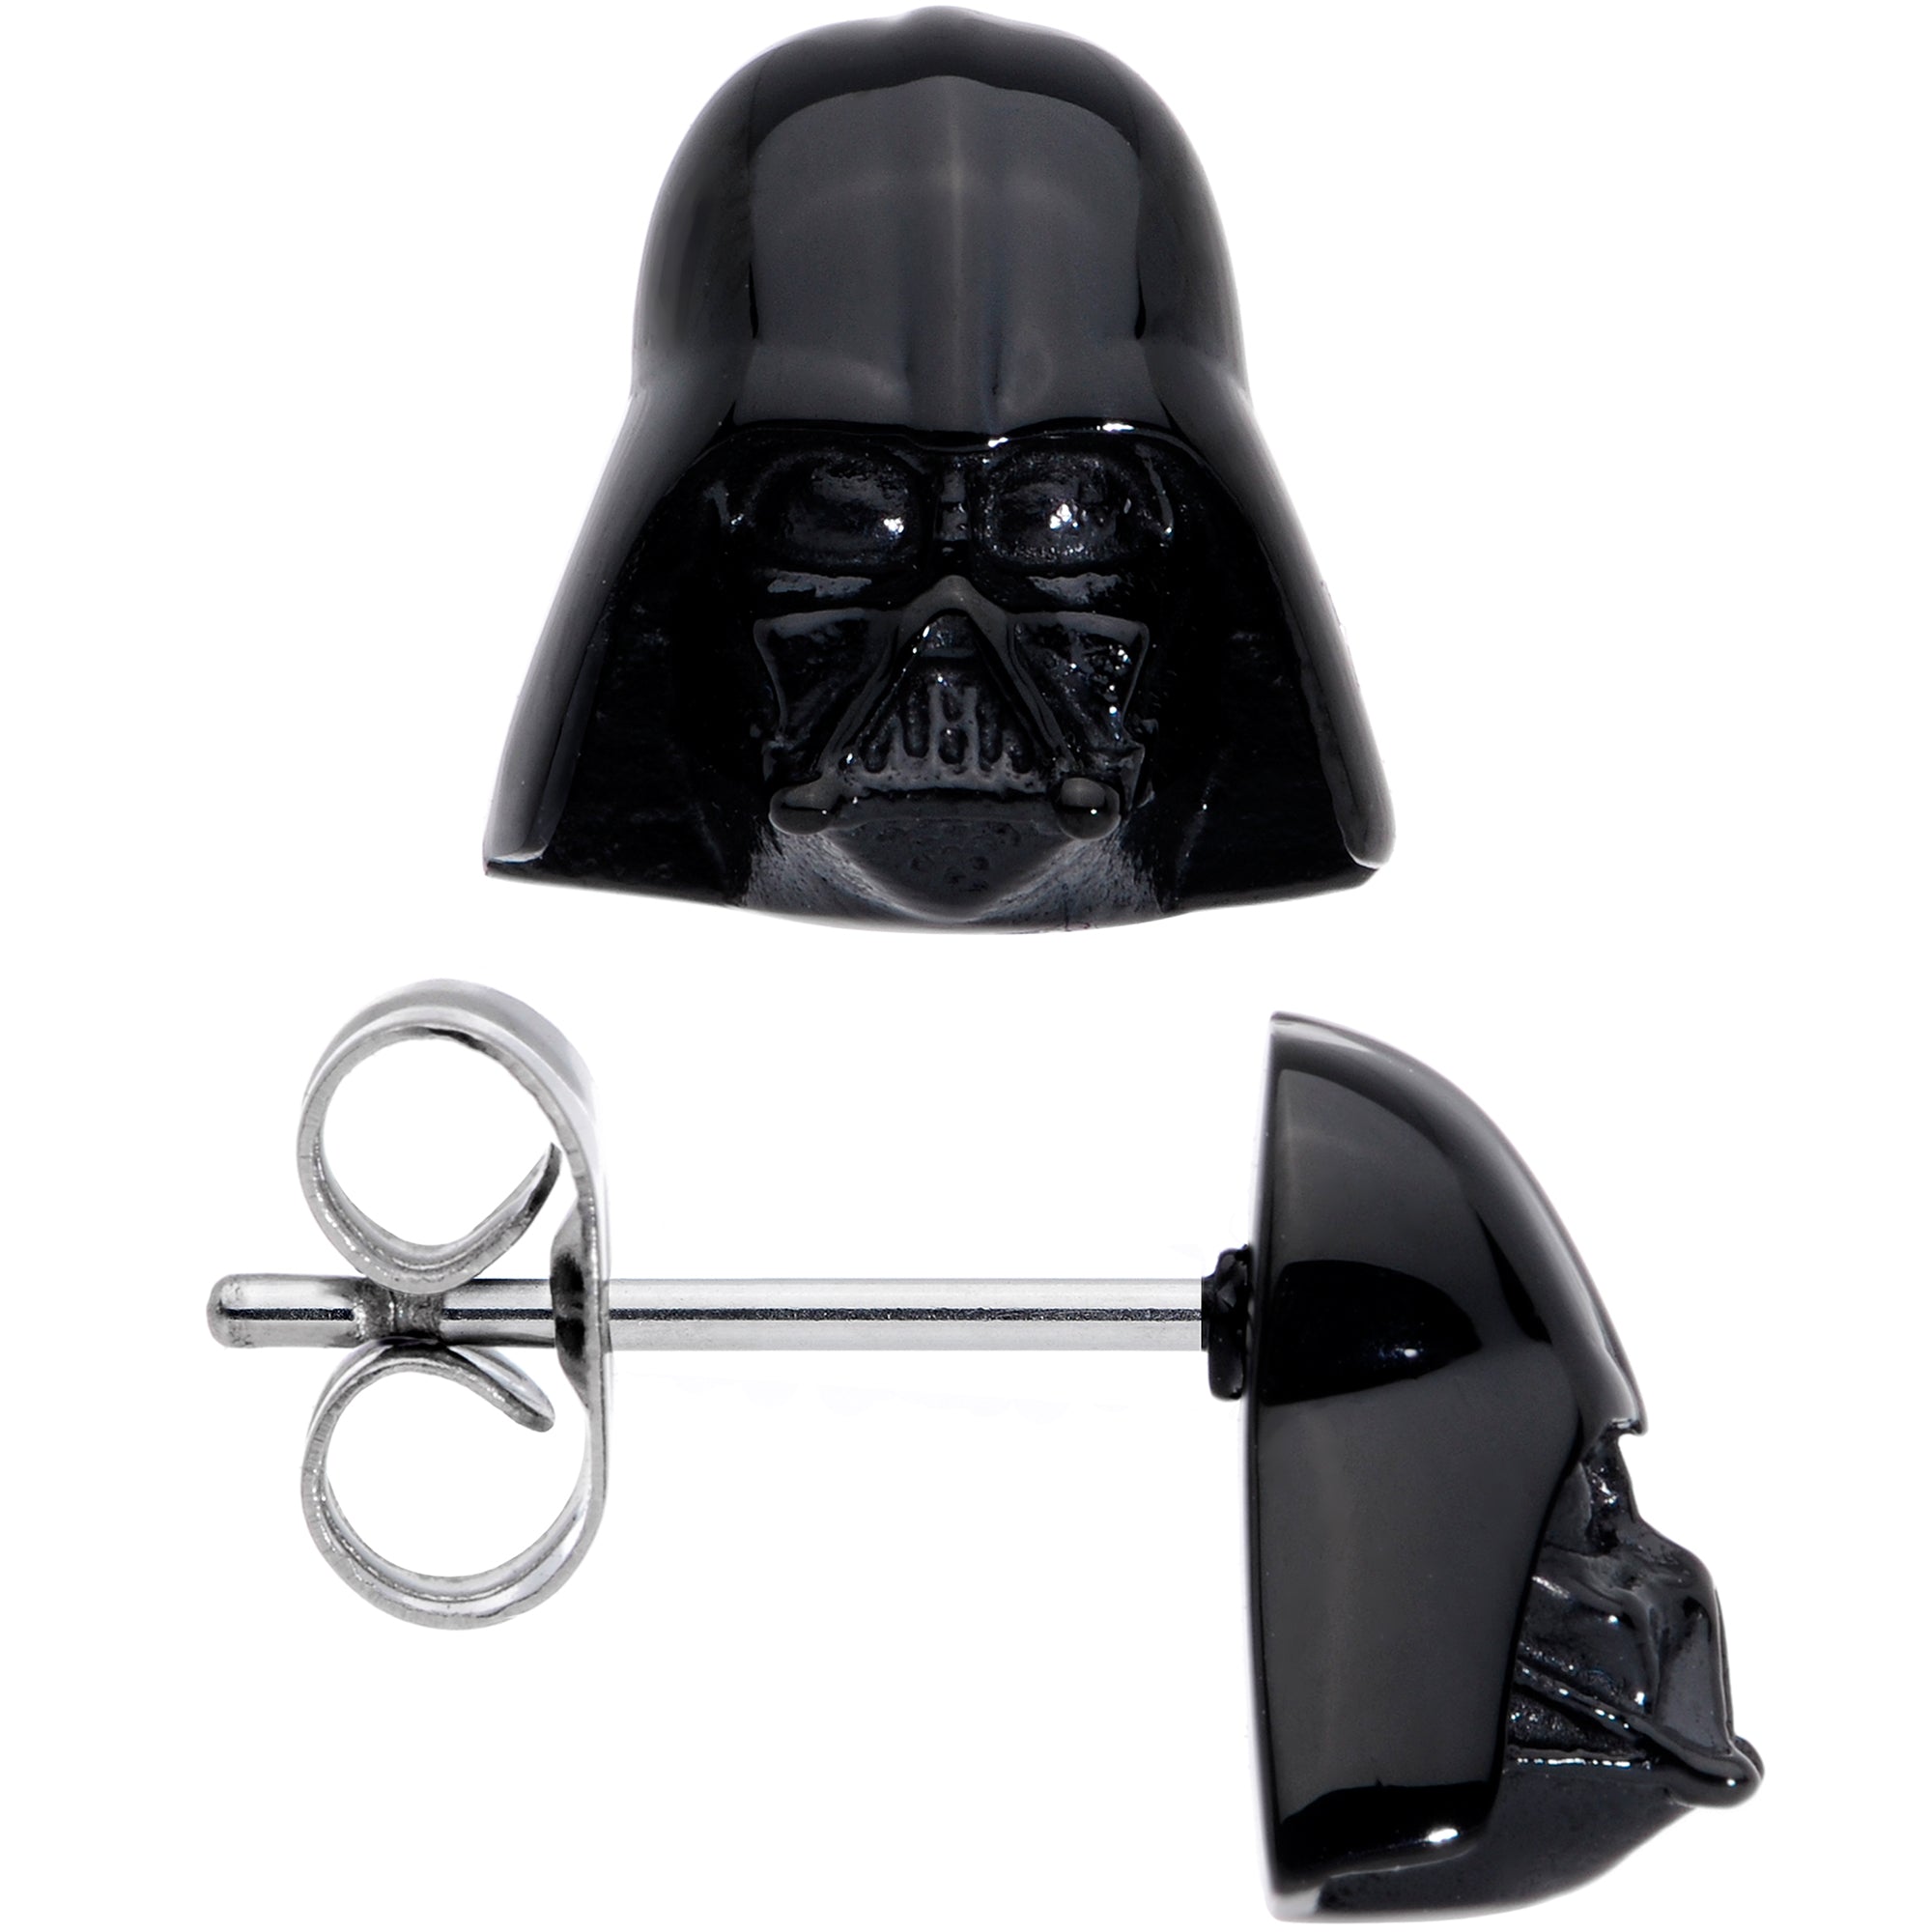 Officially Licensed Star Wars Darth Vader Post Earrings